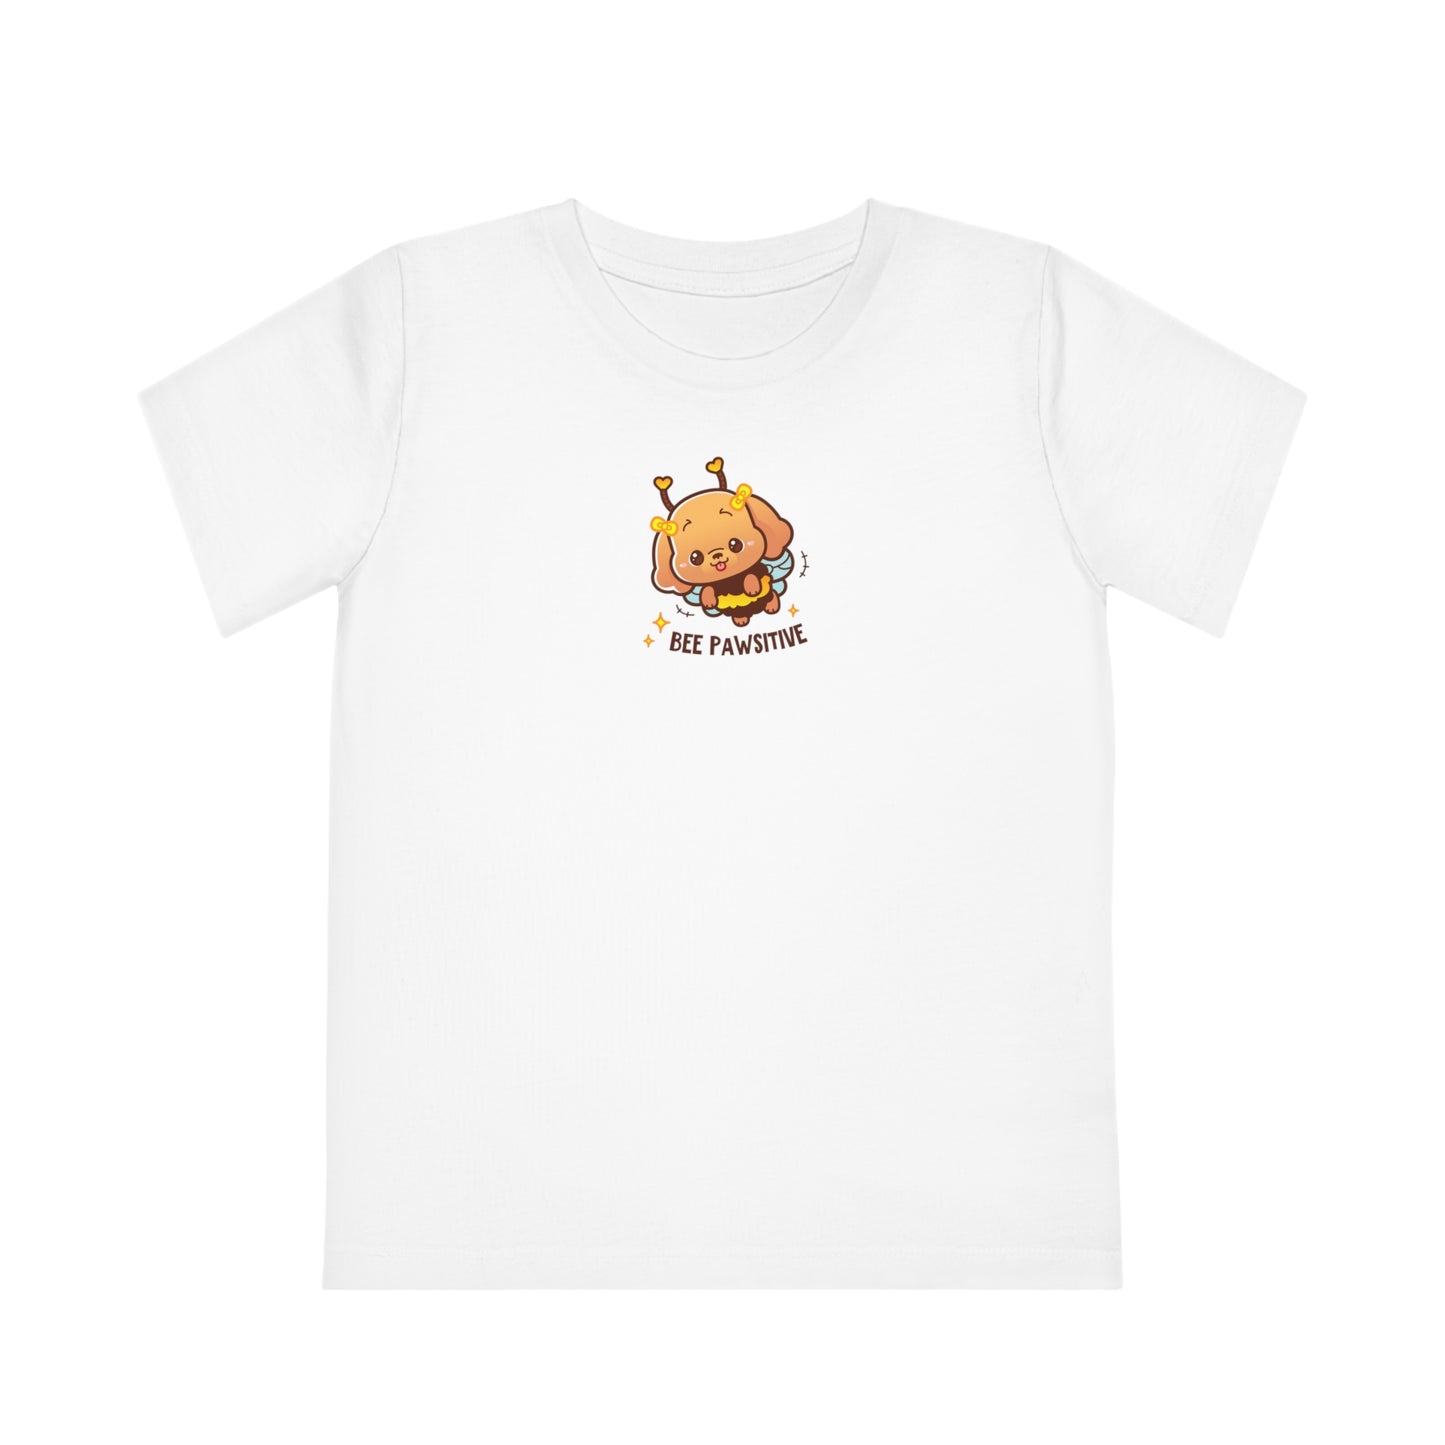 Bee Shirts for Kids, Children's Eco-friendly Cute T-shirt, Kids Natural Kindness T-shirt, Toddler & Youth Tee, Kids Positivity Tee